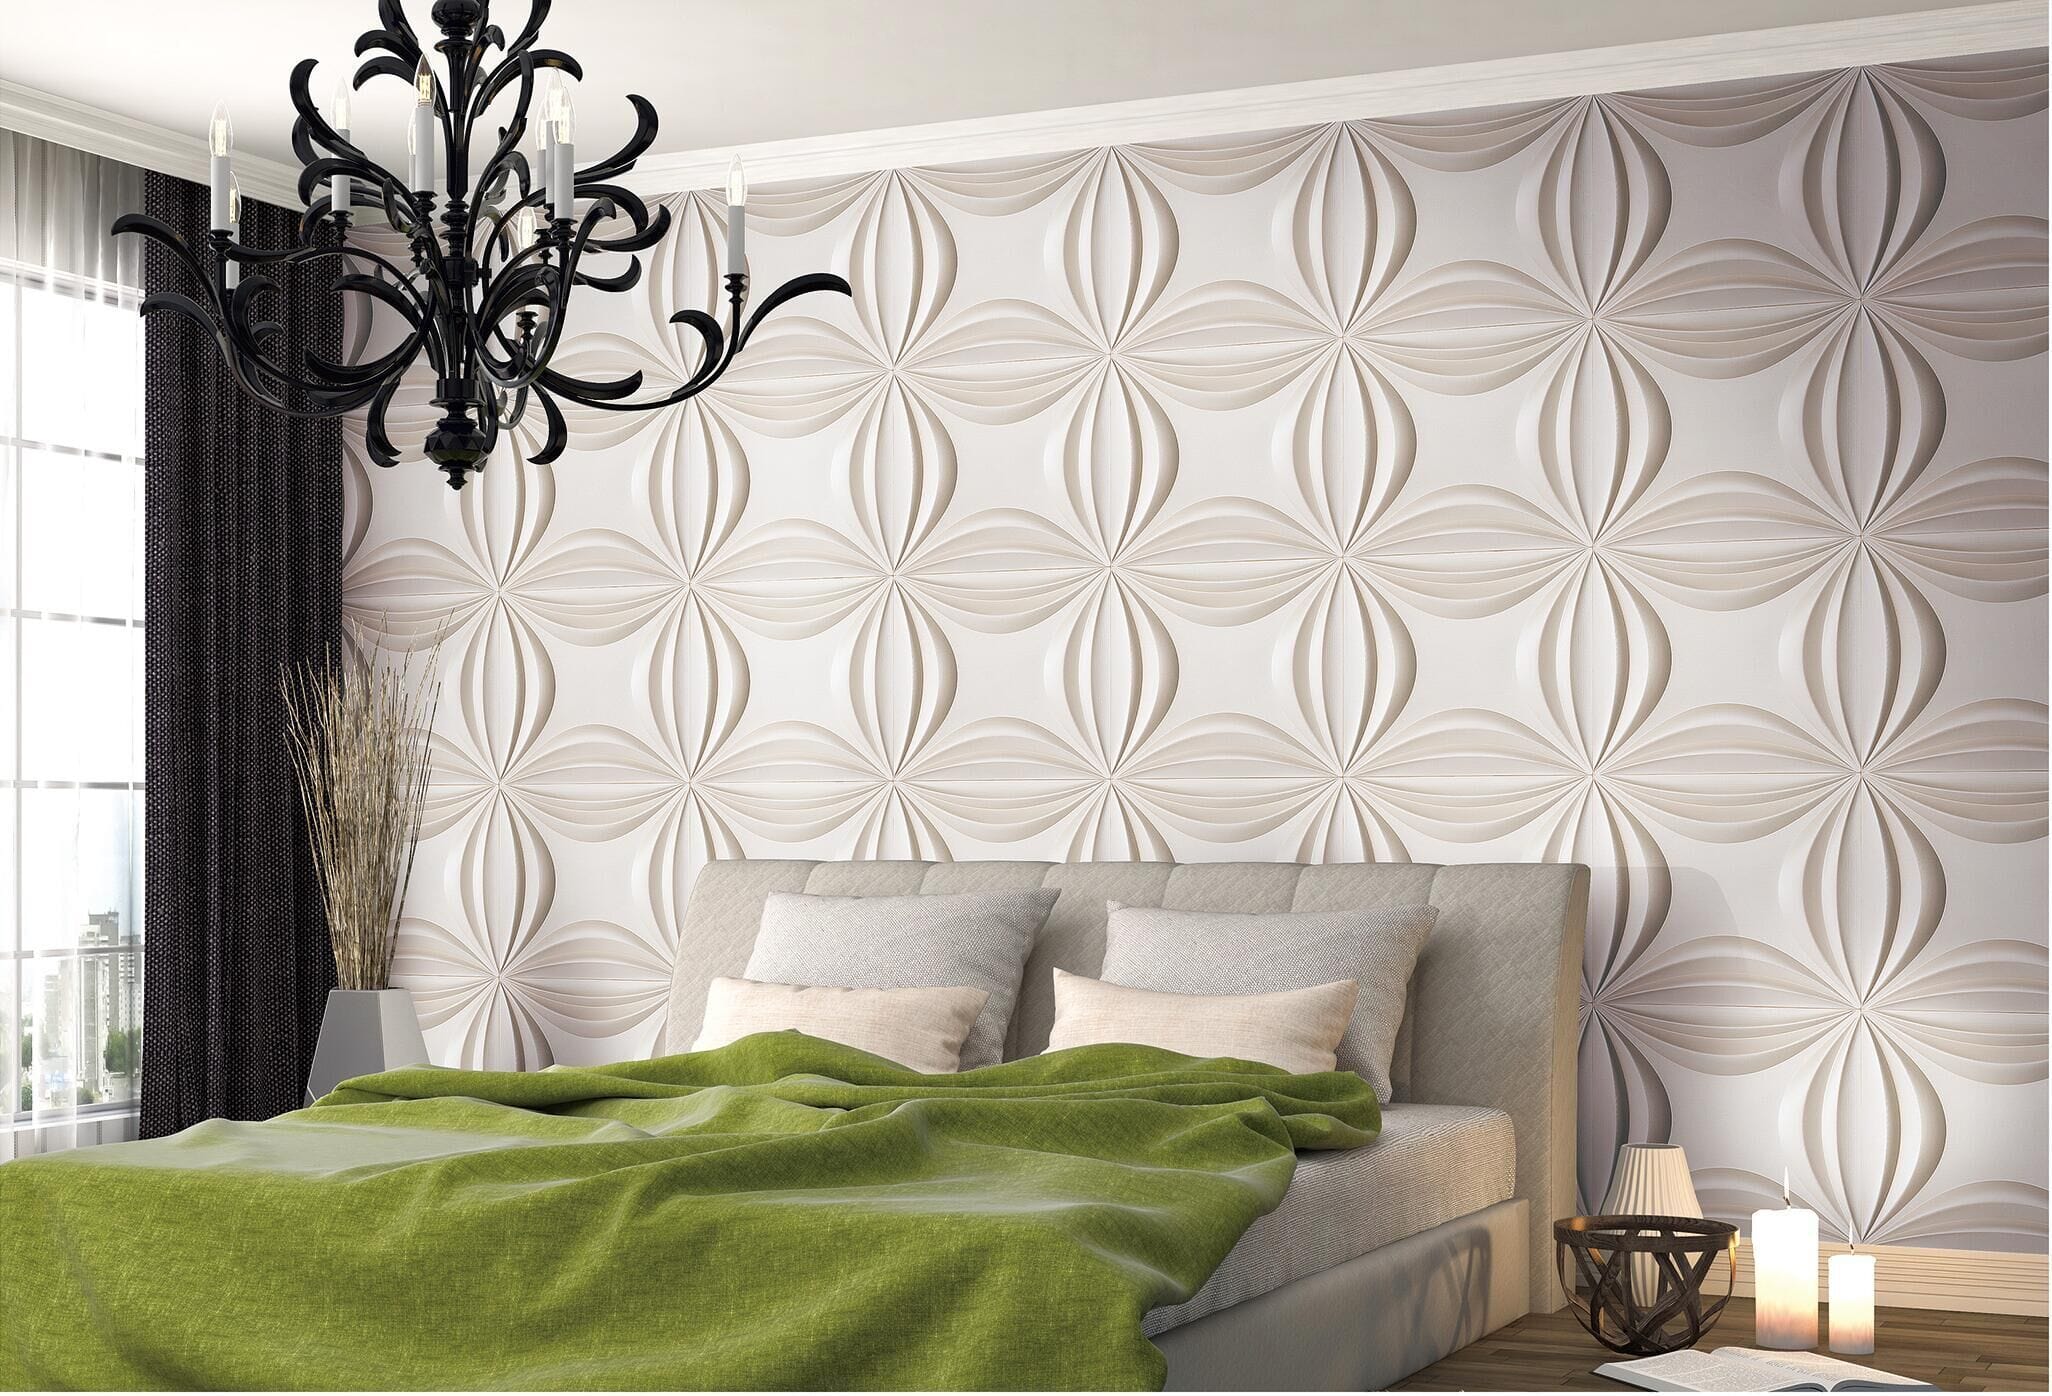 Arch 3D Wall Panel